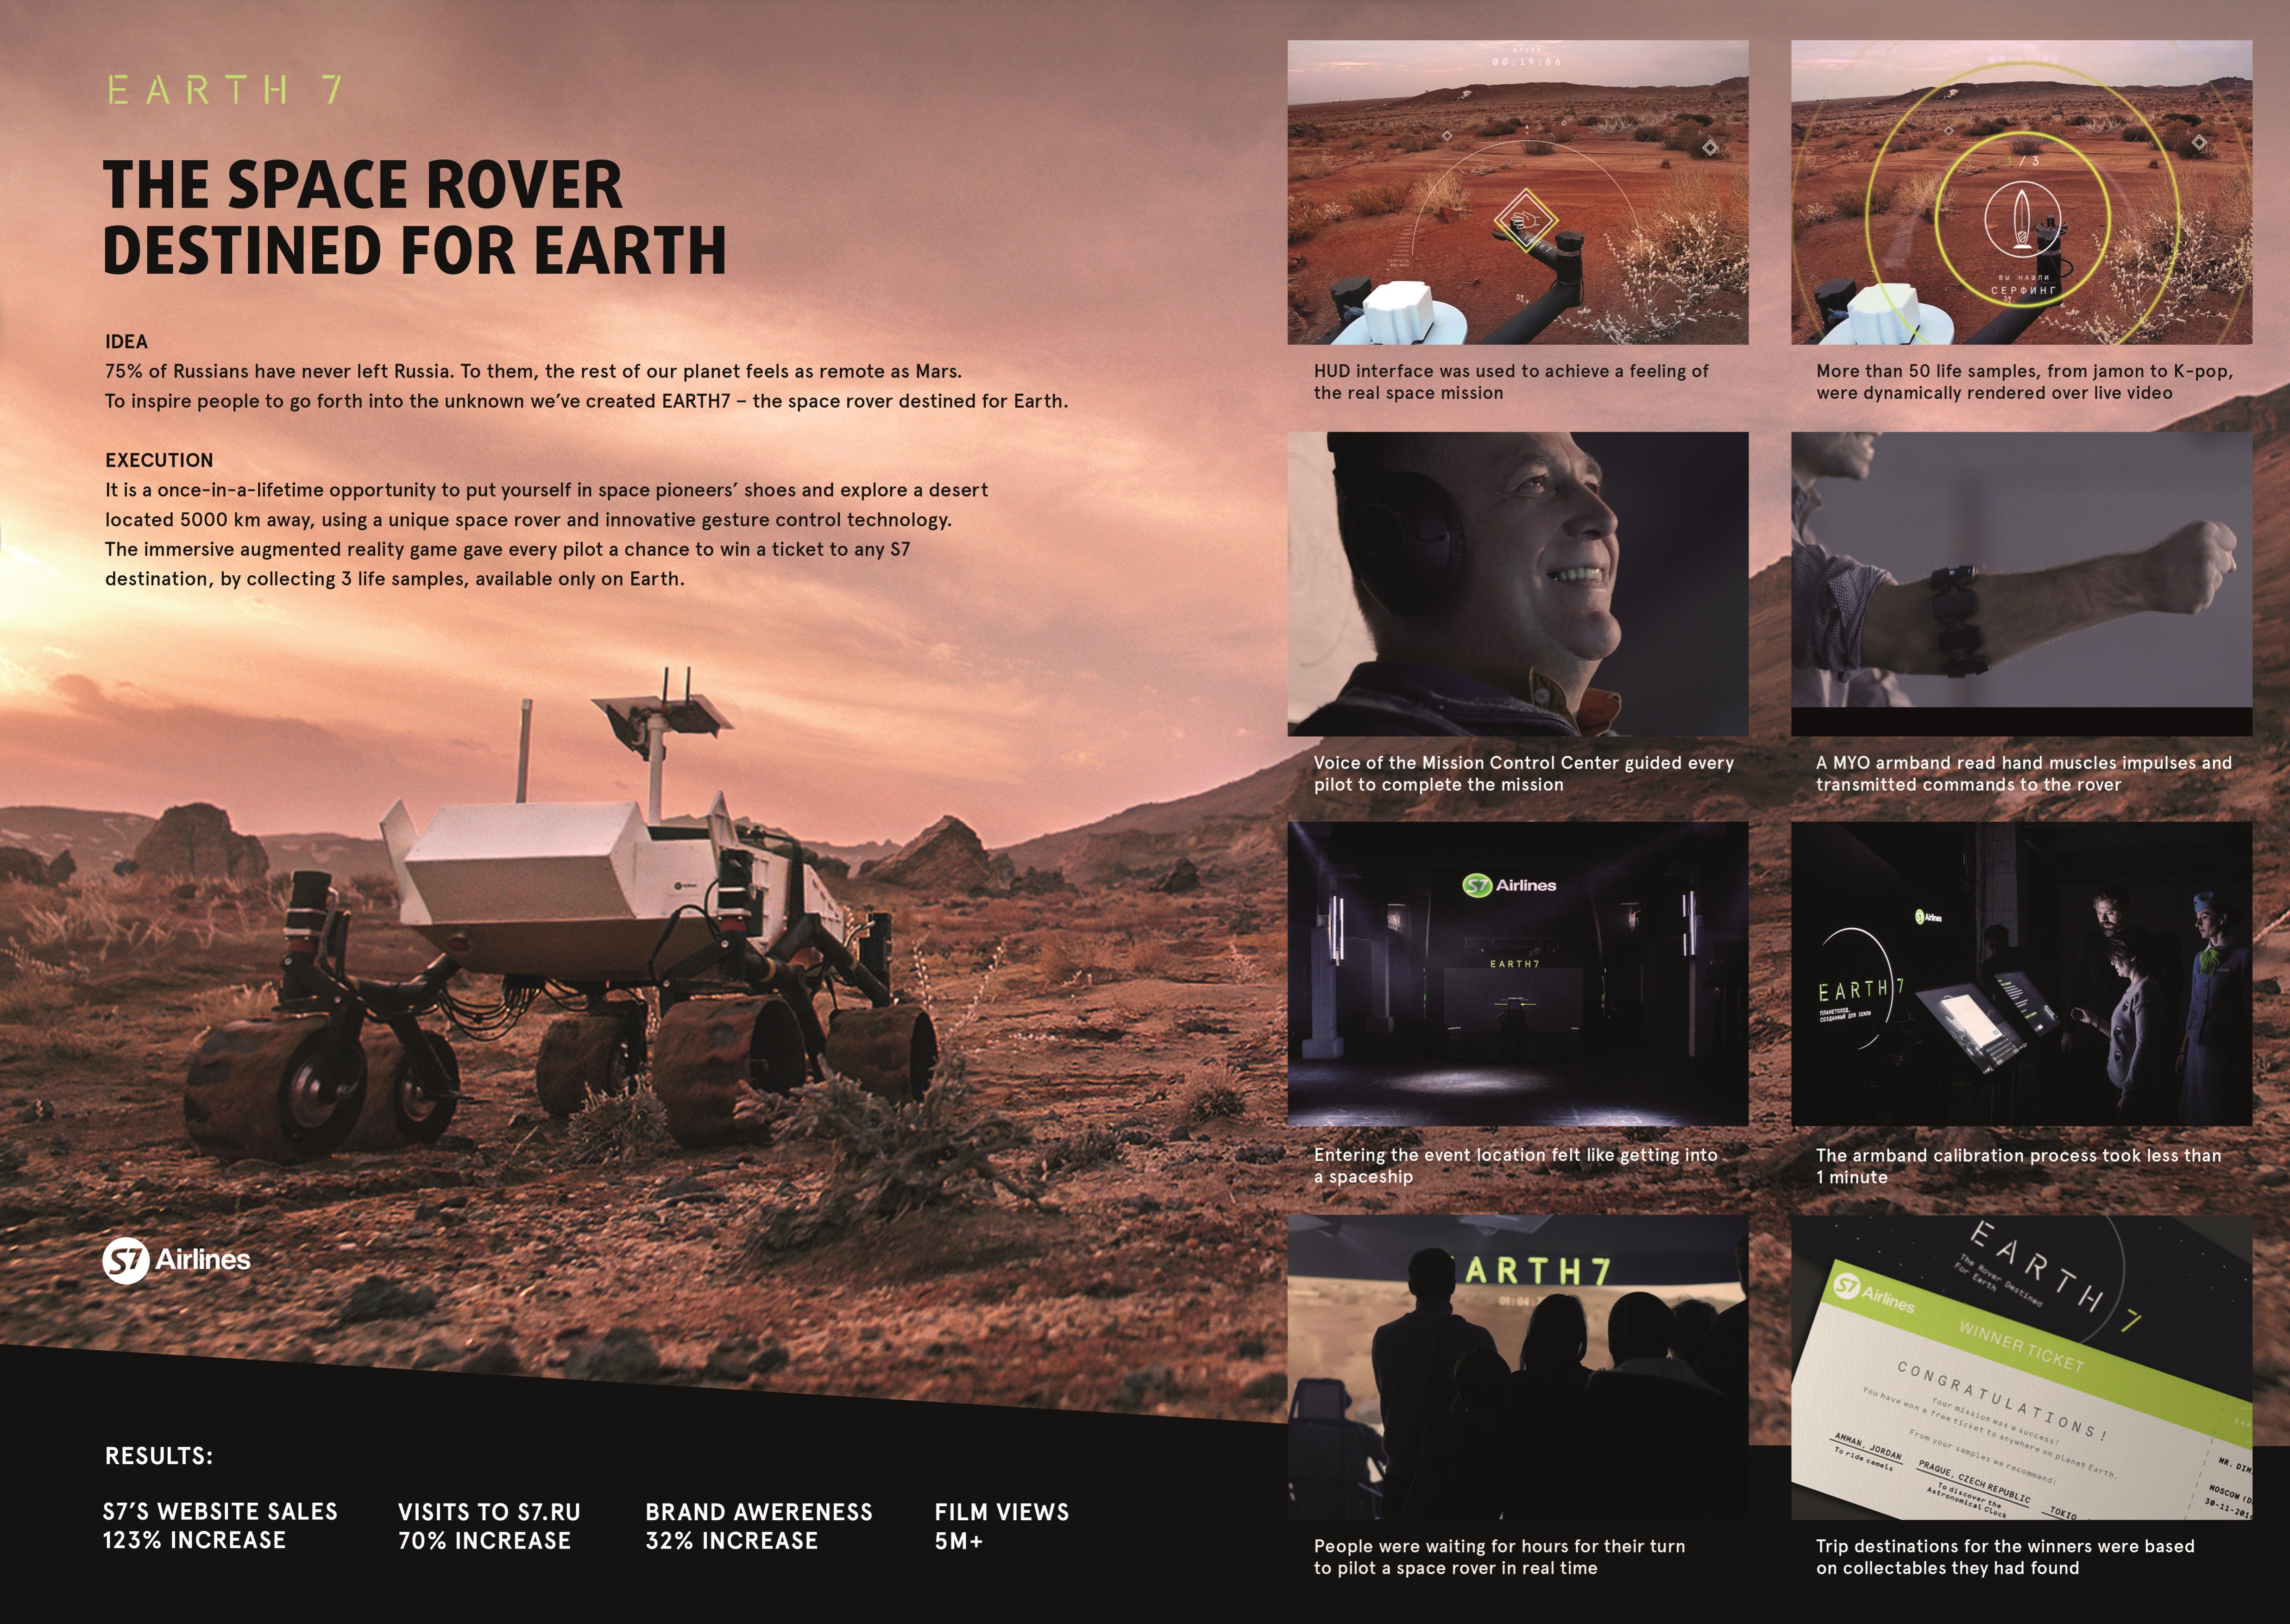 EARTH7. The space rover destined for Earth